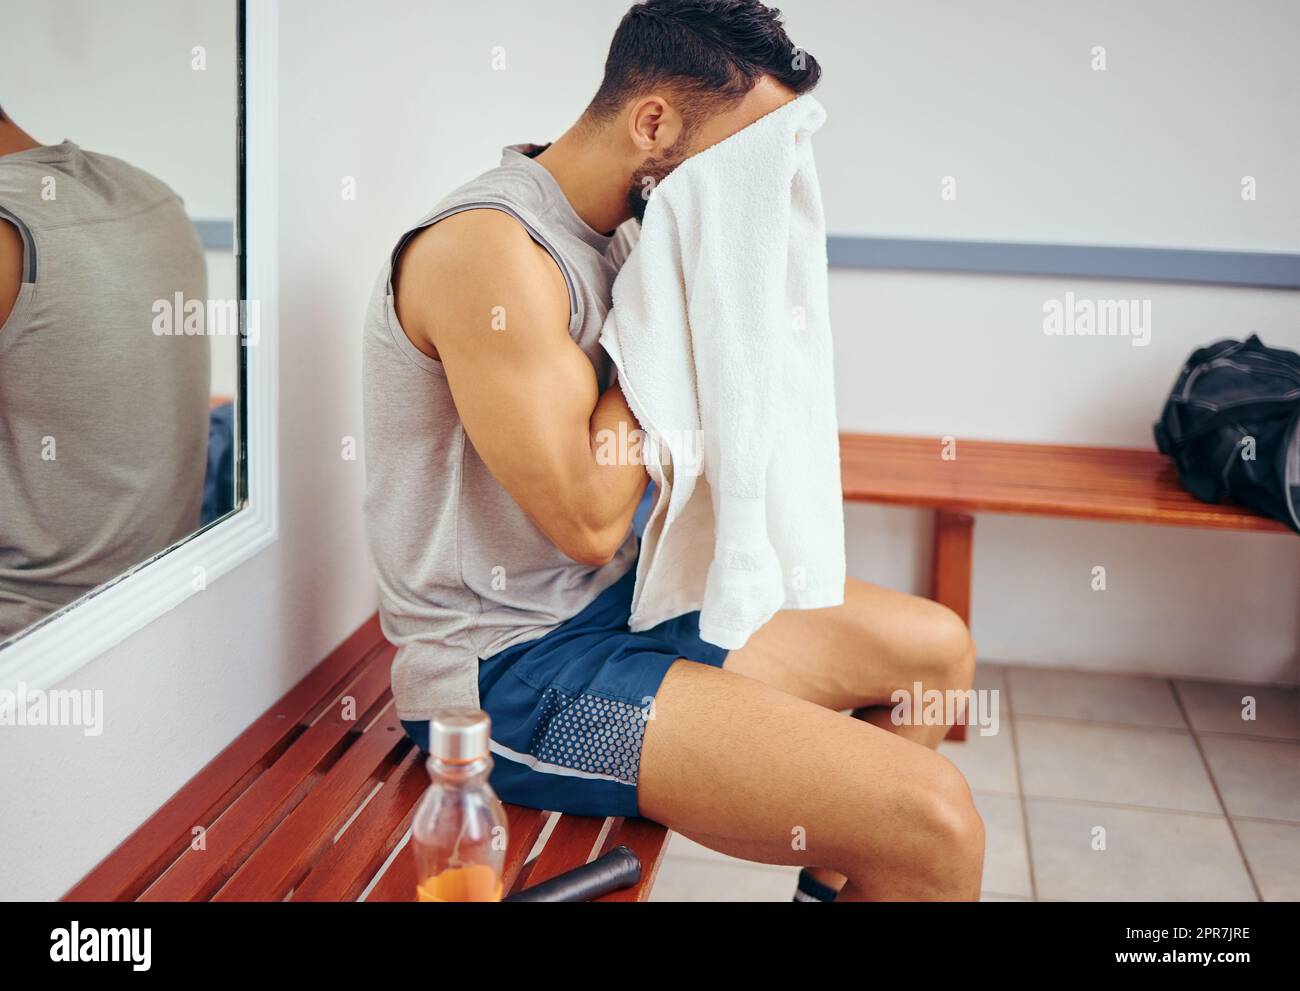 Young player wiping his face with a towel. Tired man cleaning his face with a towel after a squash match. Squatch player sitting in his gym locker room. Mixed race man taking a break after a match Stock Photo